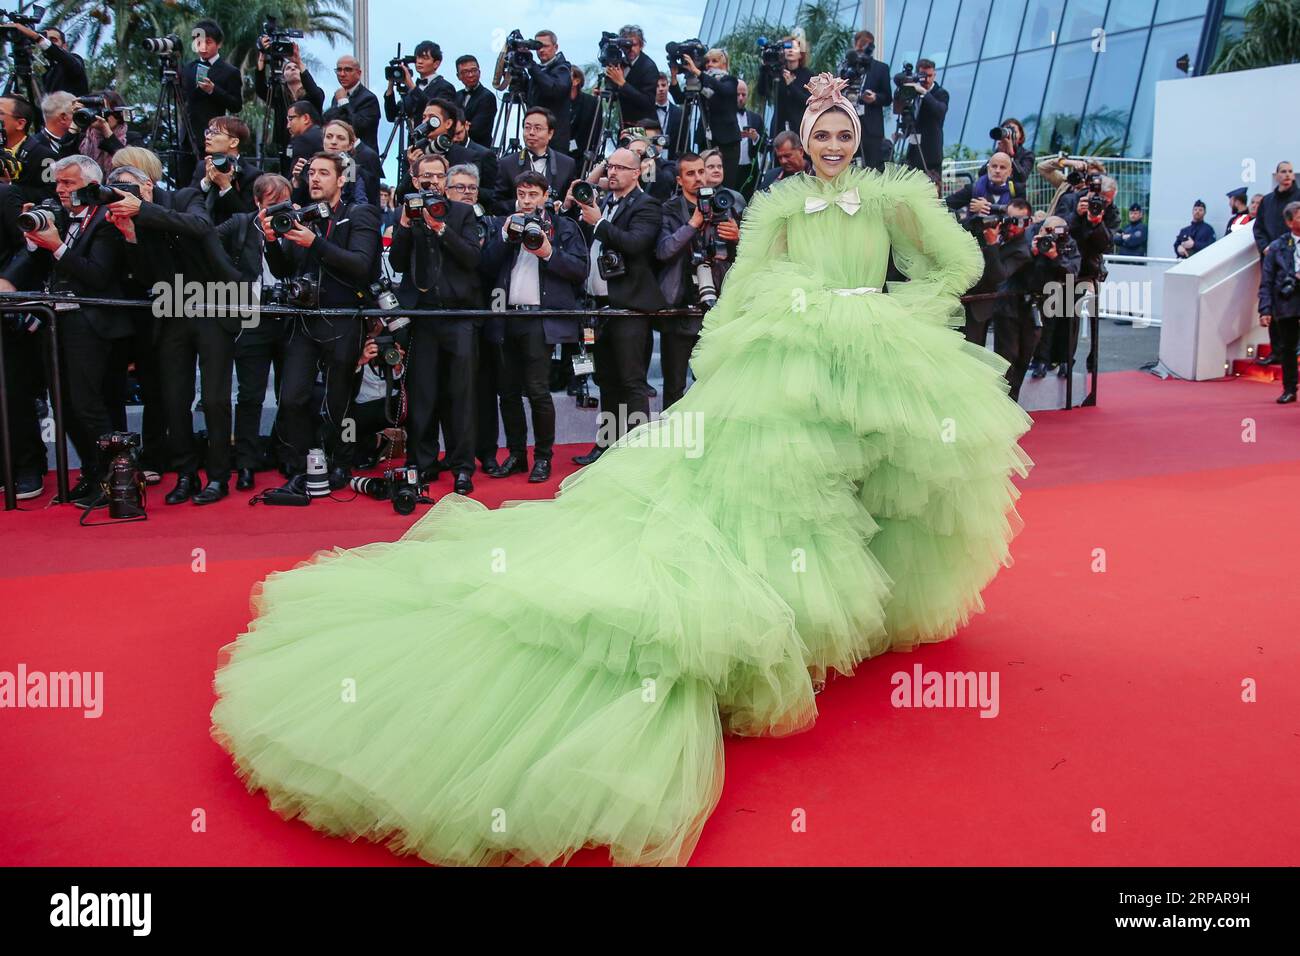 (190517) -- CANNES, May 17, 2019 (Xinhua) -- Indian actress Deepika Padukone poses on the red carpet for the premiere of the film Dolor y Gloria at the 72nd Cannes Film Festival in Cannes, France, on May 17, 2019. The 72nd Cannes Film Festival is held here from May 14 to 25. (Xinhua/Zhang Cheng) FRANCE-CANNES- DOLORY Y GLORIA -PREMIERE PUBLICATIONxNOTxINxCHN Stock Photo